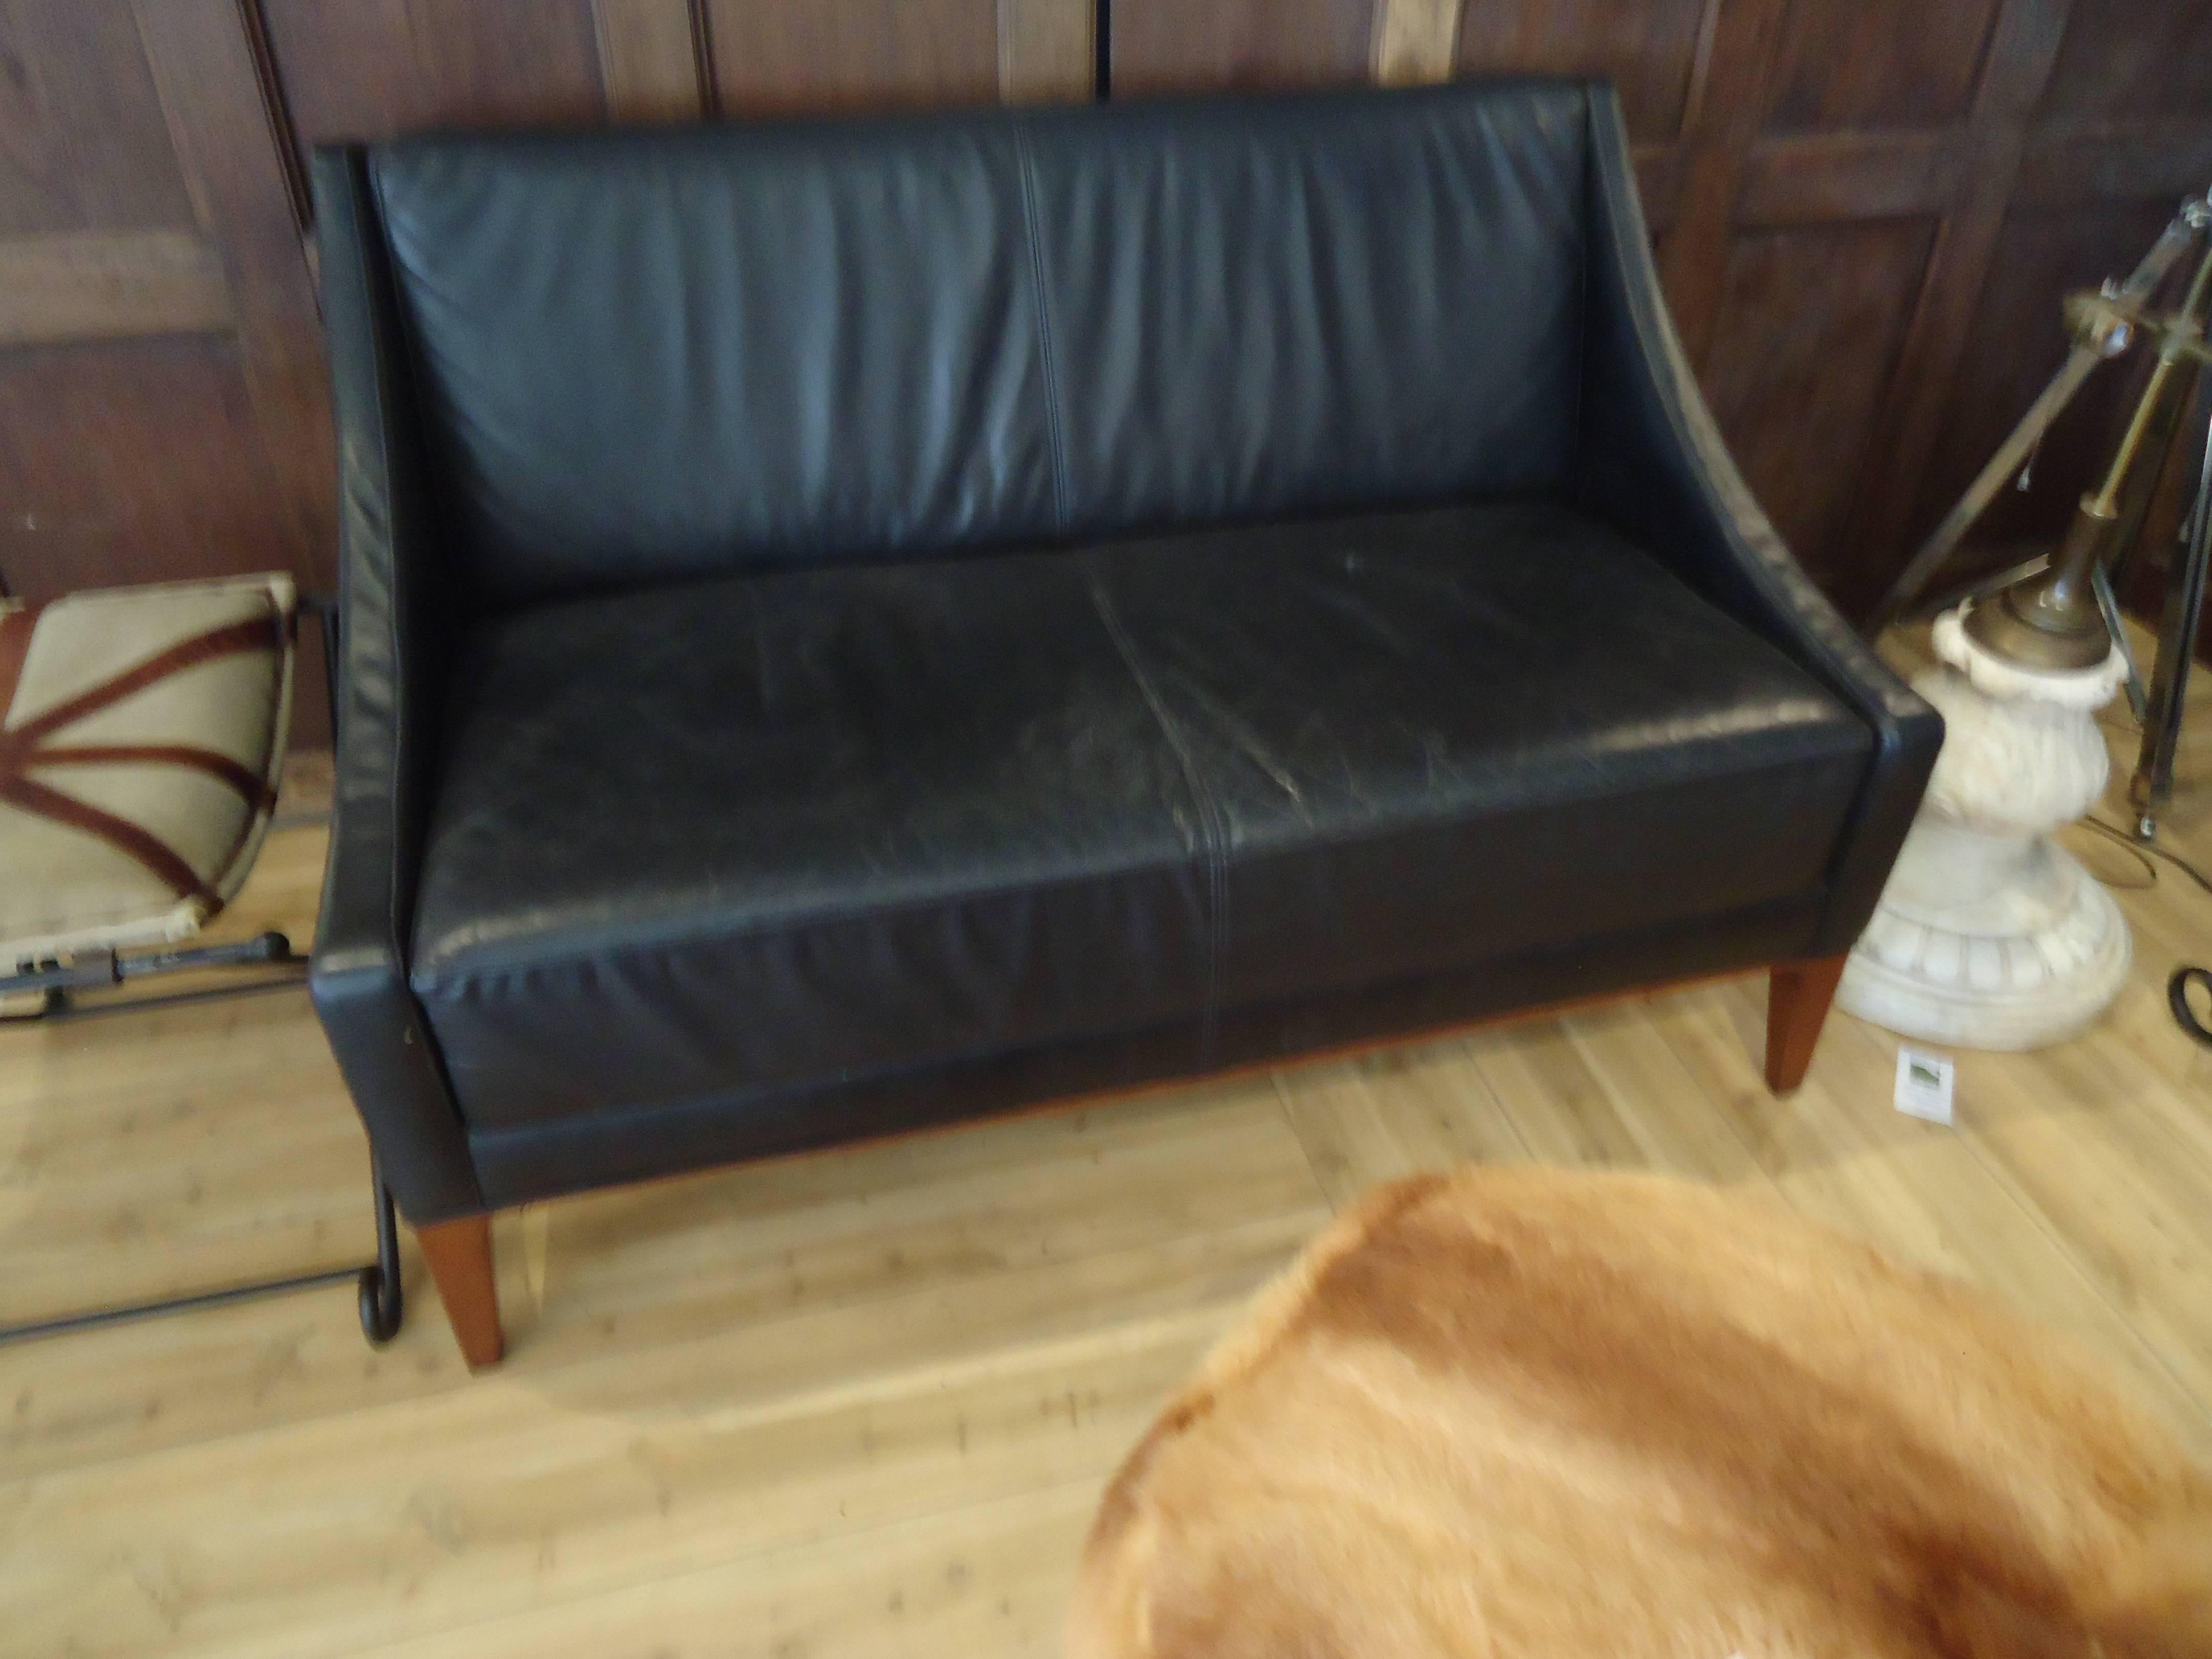 Sleek black leather Mid-Century Modern pair of loveseats. Compact, comfortable and chic. Sofas also available.